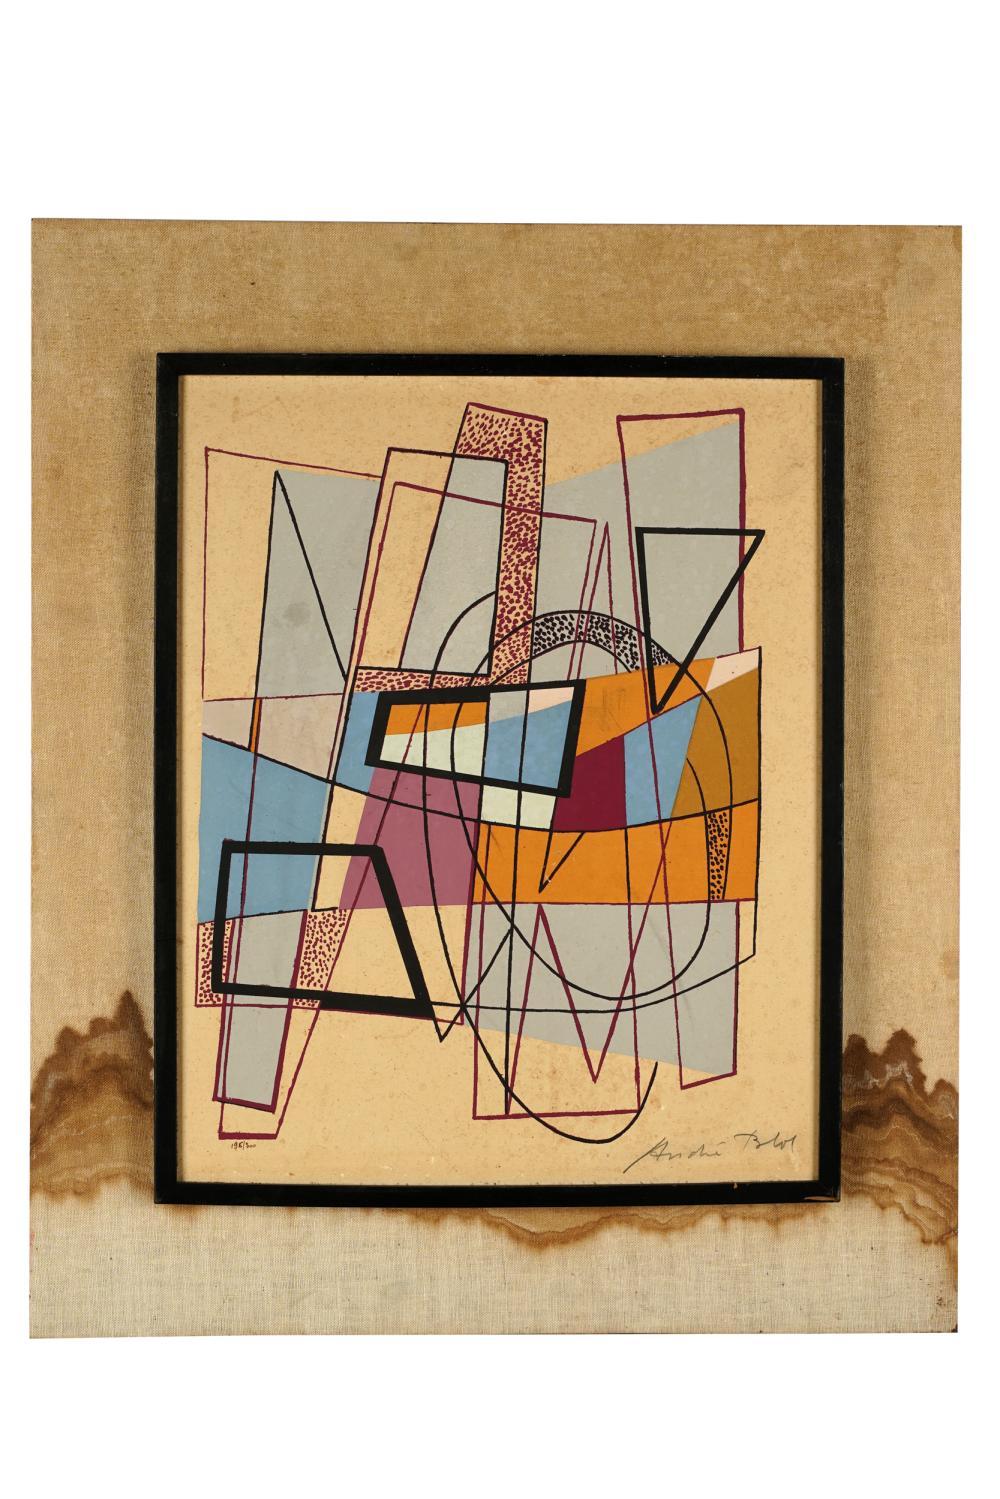 ANDRE BLOC (1896-1966): ABSTRACTserigraph